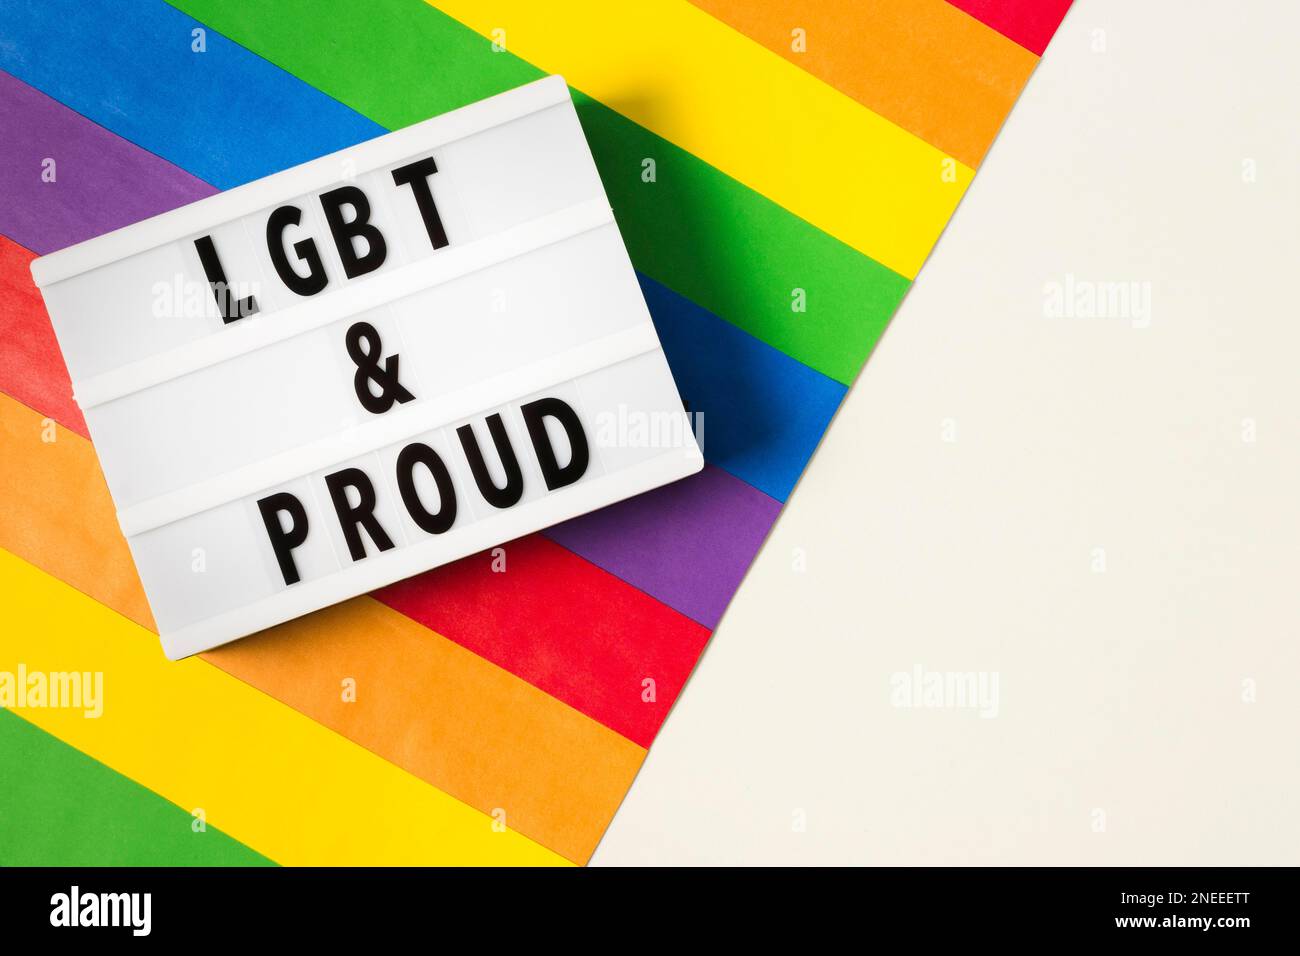 lgbt proud concept rainbow colors. High resolution photo Stock Photo